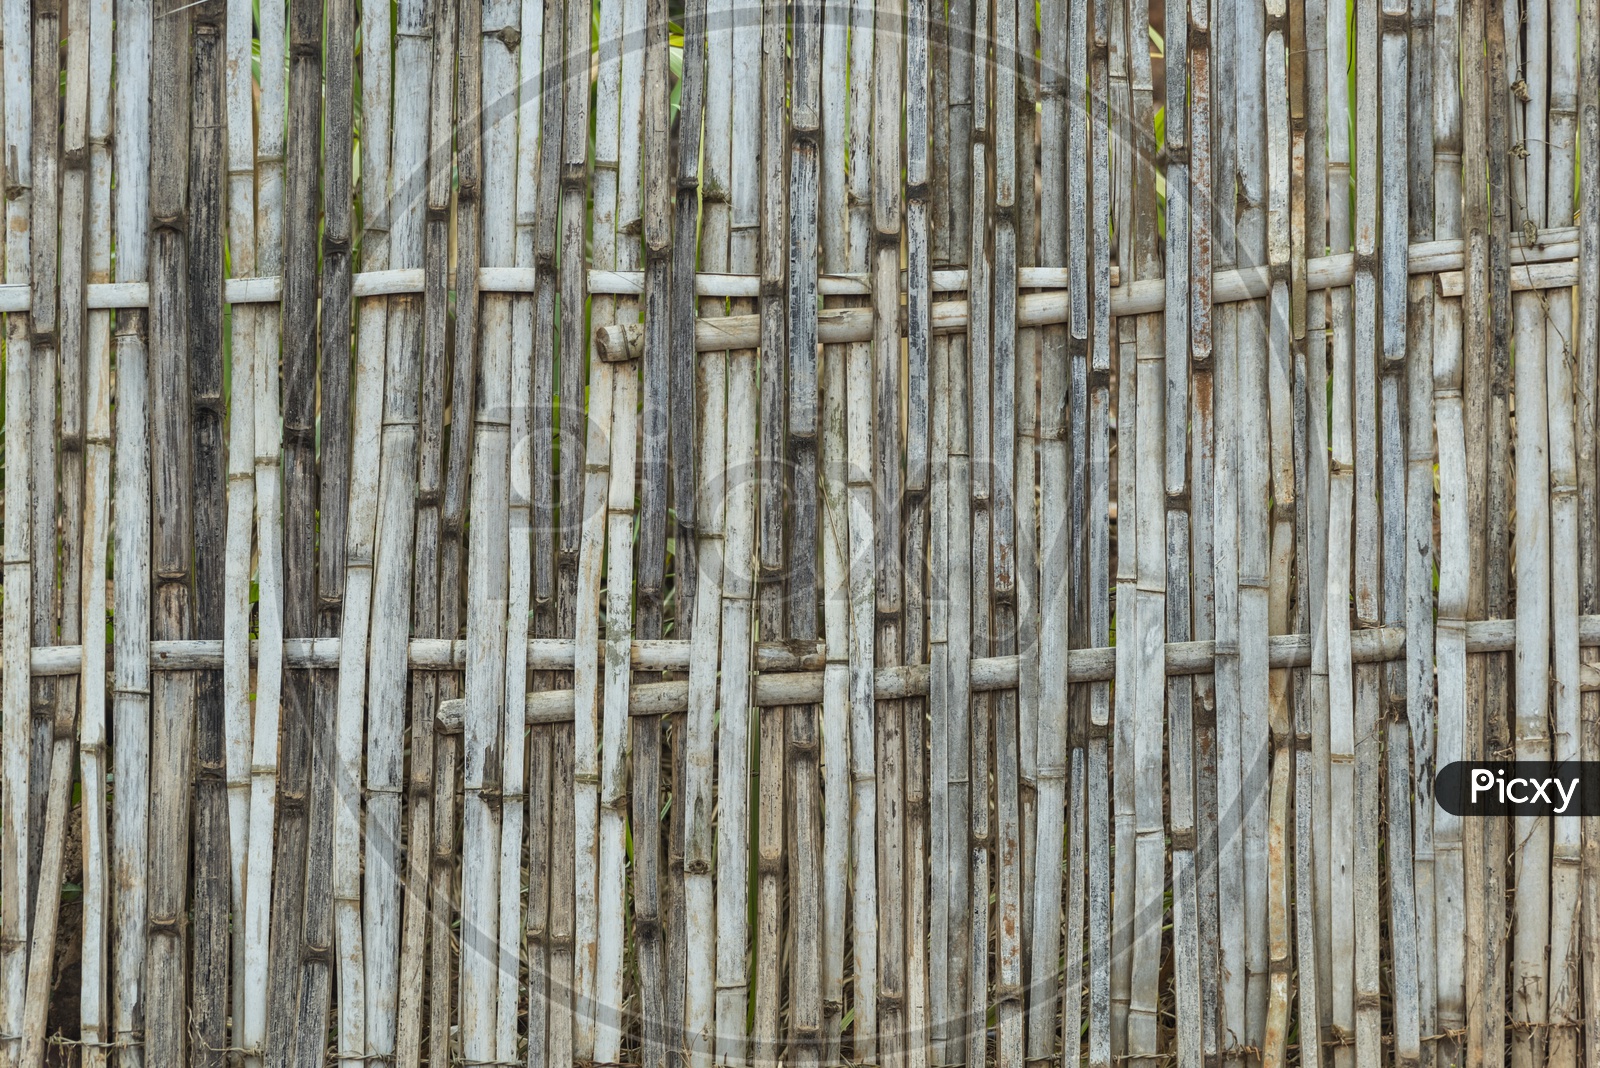 Native Thai style bamboo wall  in Country Side Rural Villages